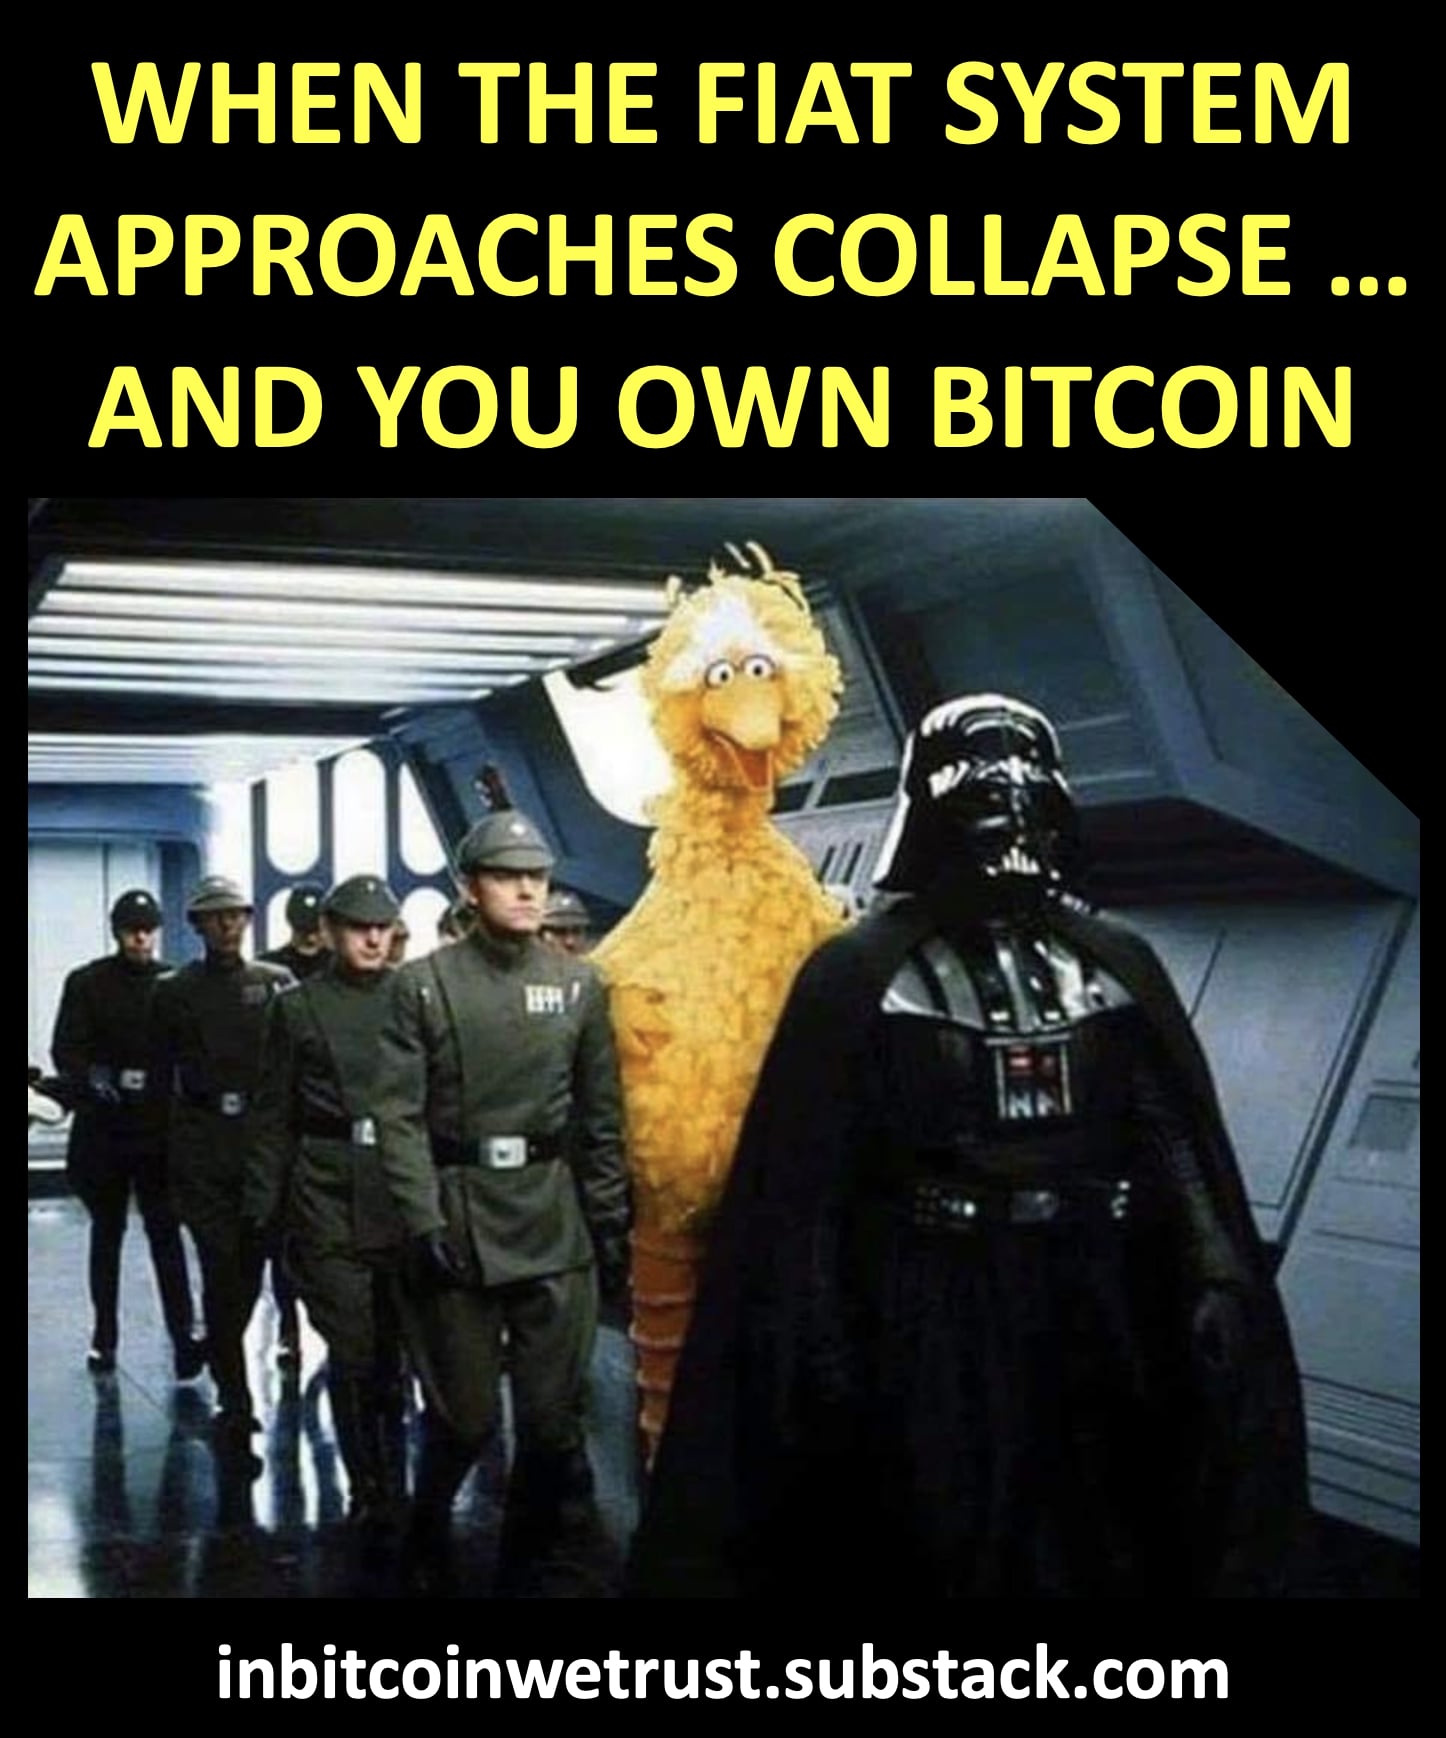 WHEN THE FIAT SYSTEM
APPROACHES COLLAPSE ...
AND YOU OWN BITCOIN
inbitcoinwetrust.substack.com